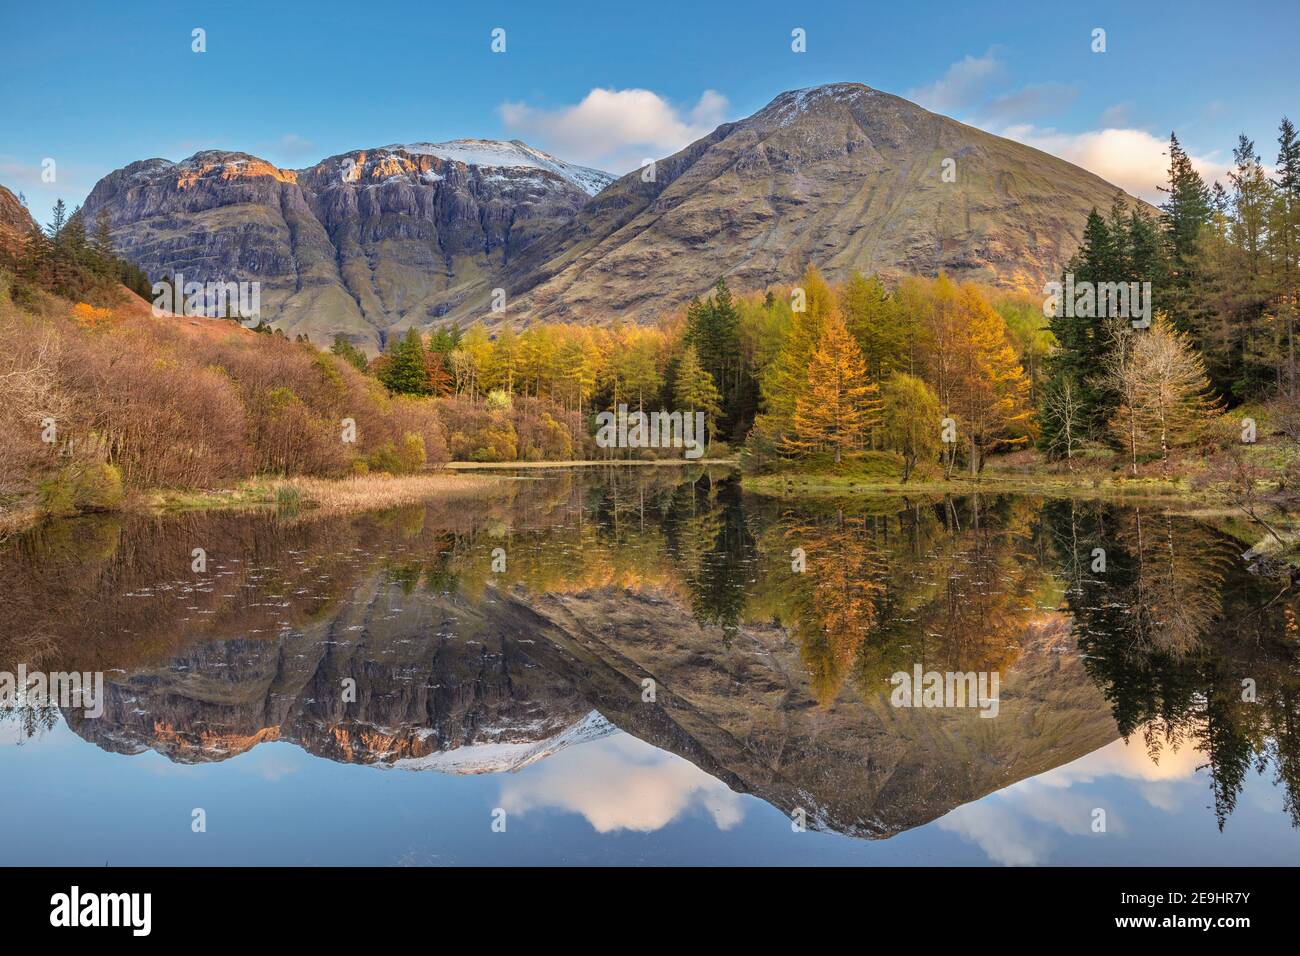 Glencoe, Scotland: A small pond with fall reflections and the mountains of Glen Coe Stock Photo